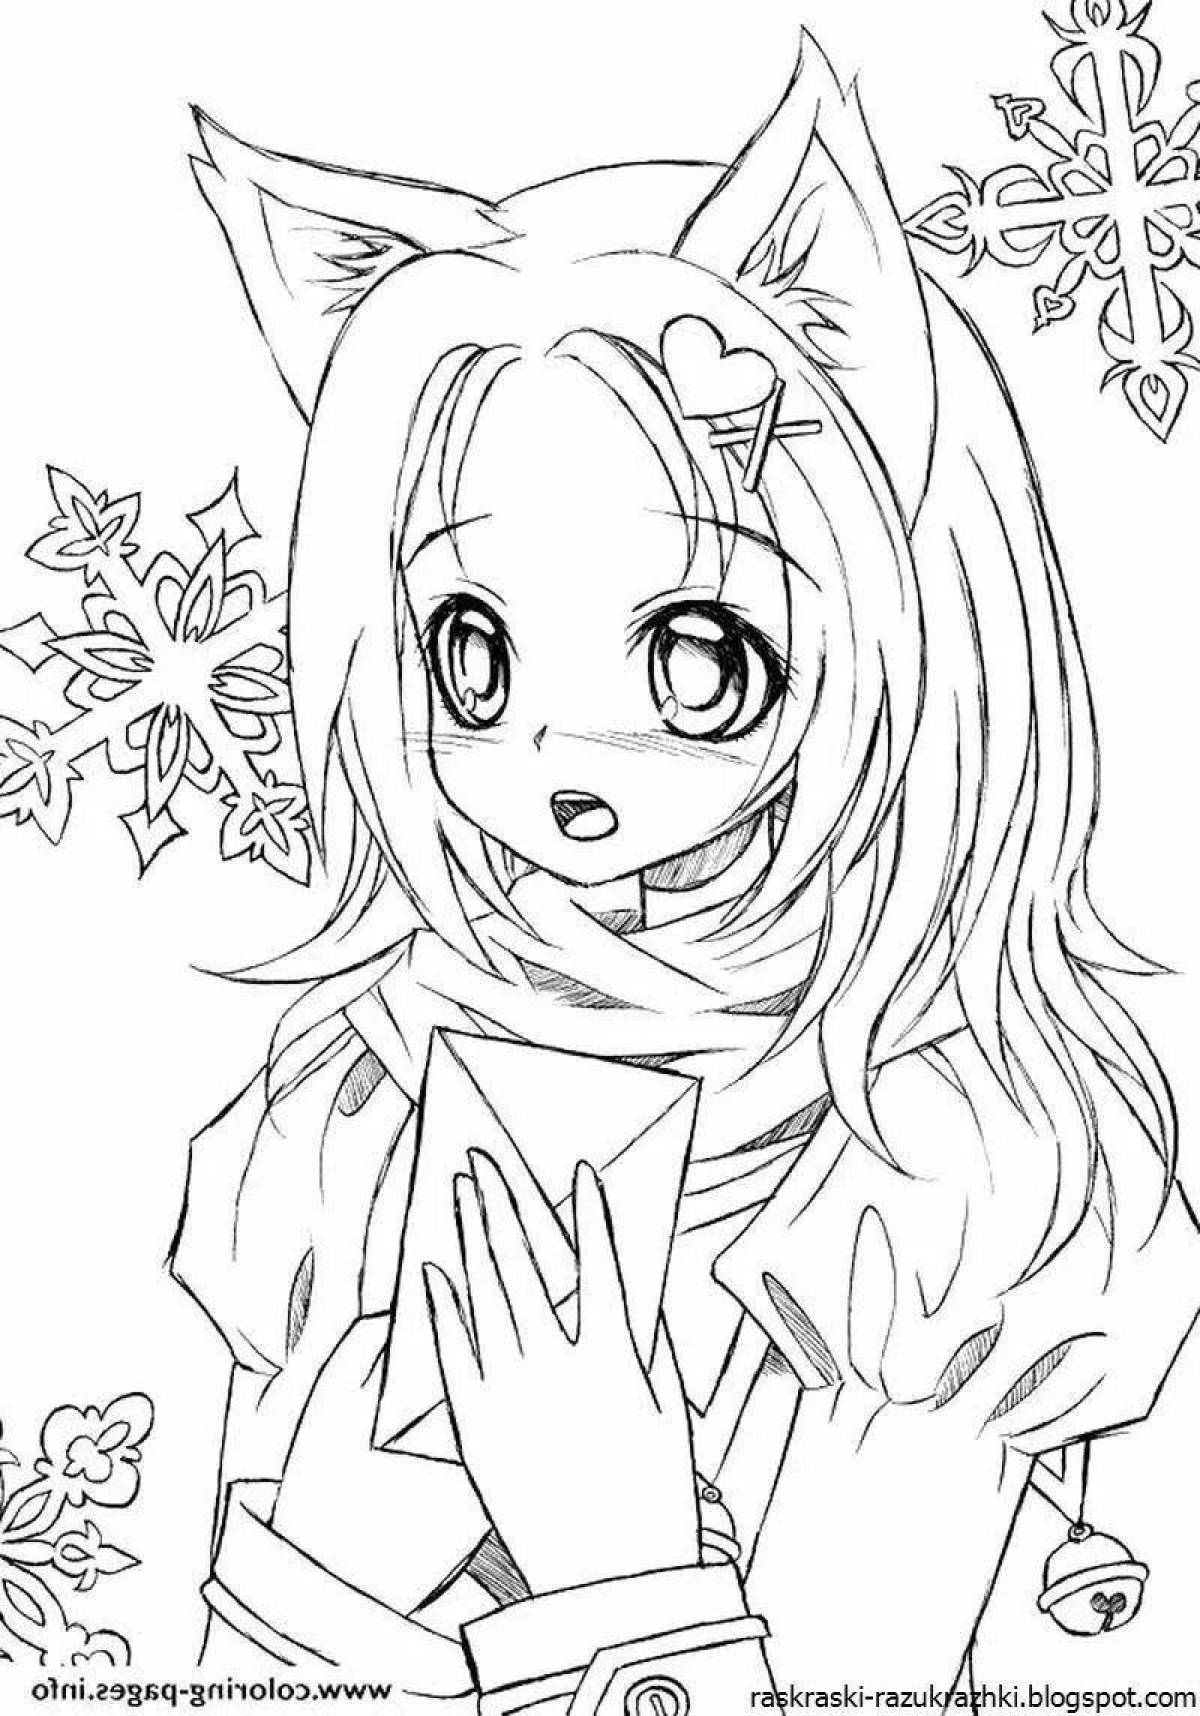 Charming cat girl coloring book